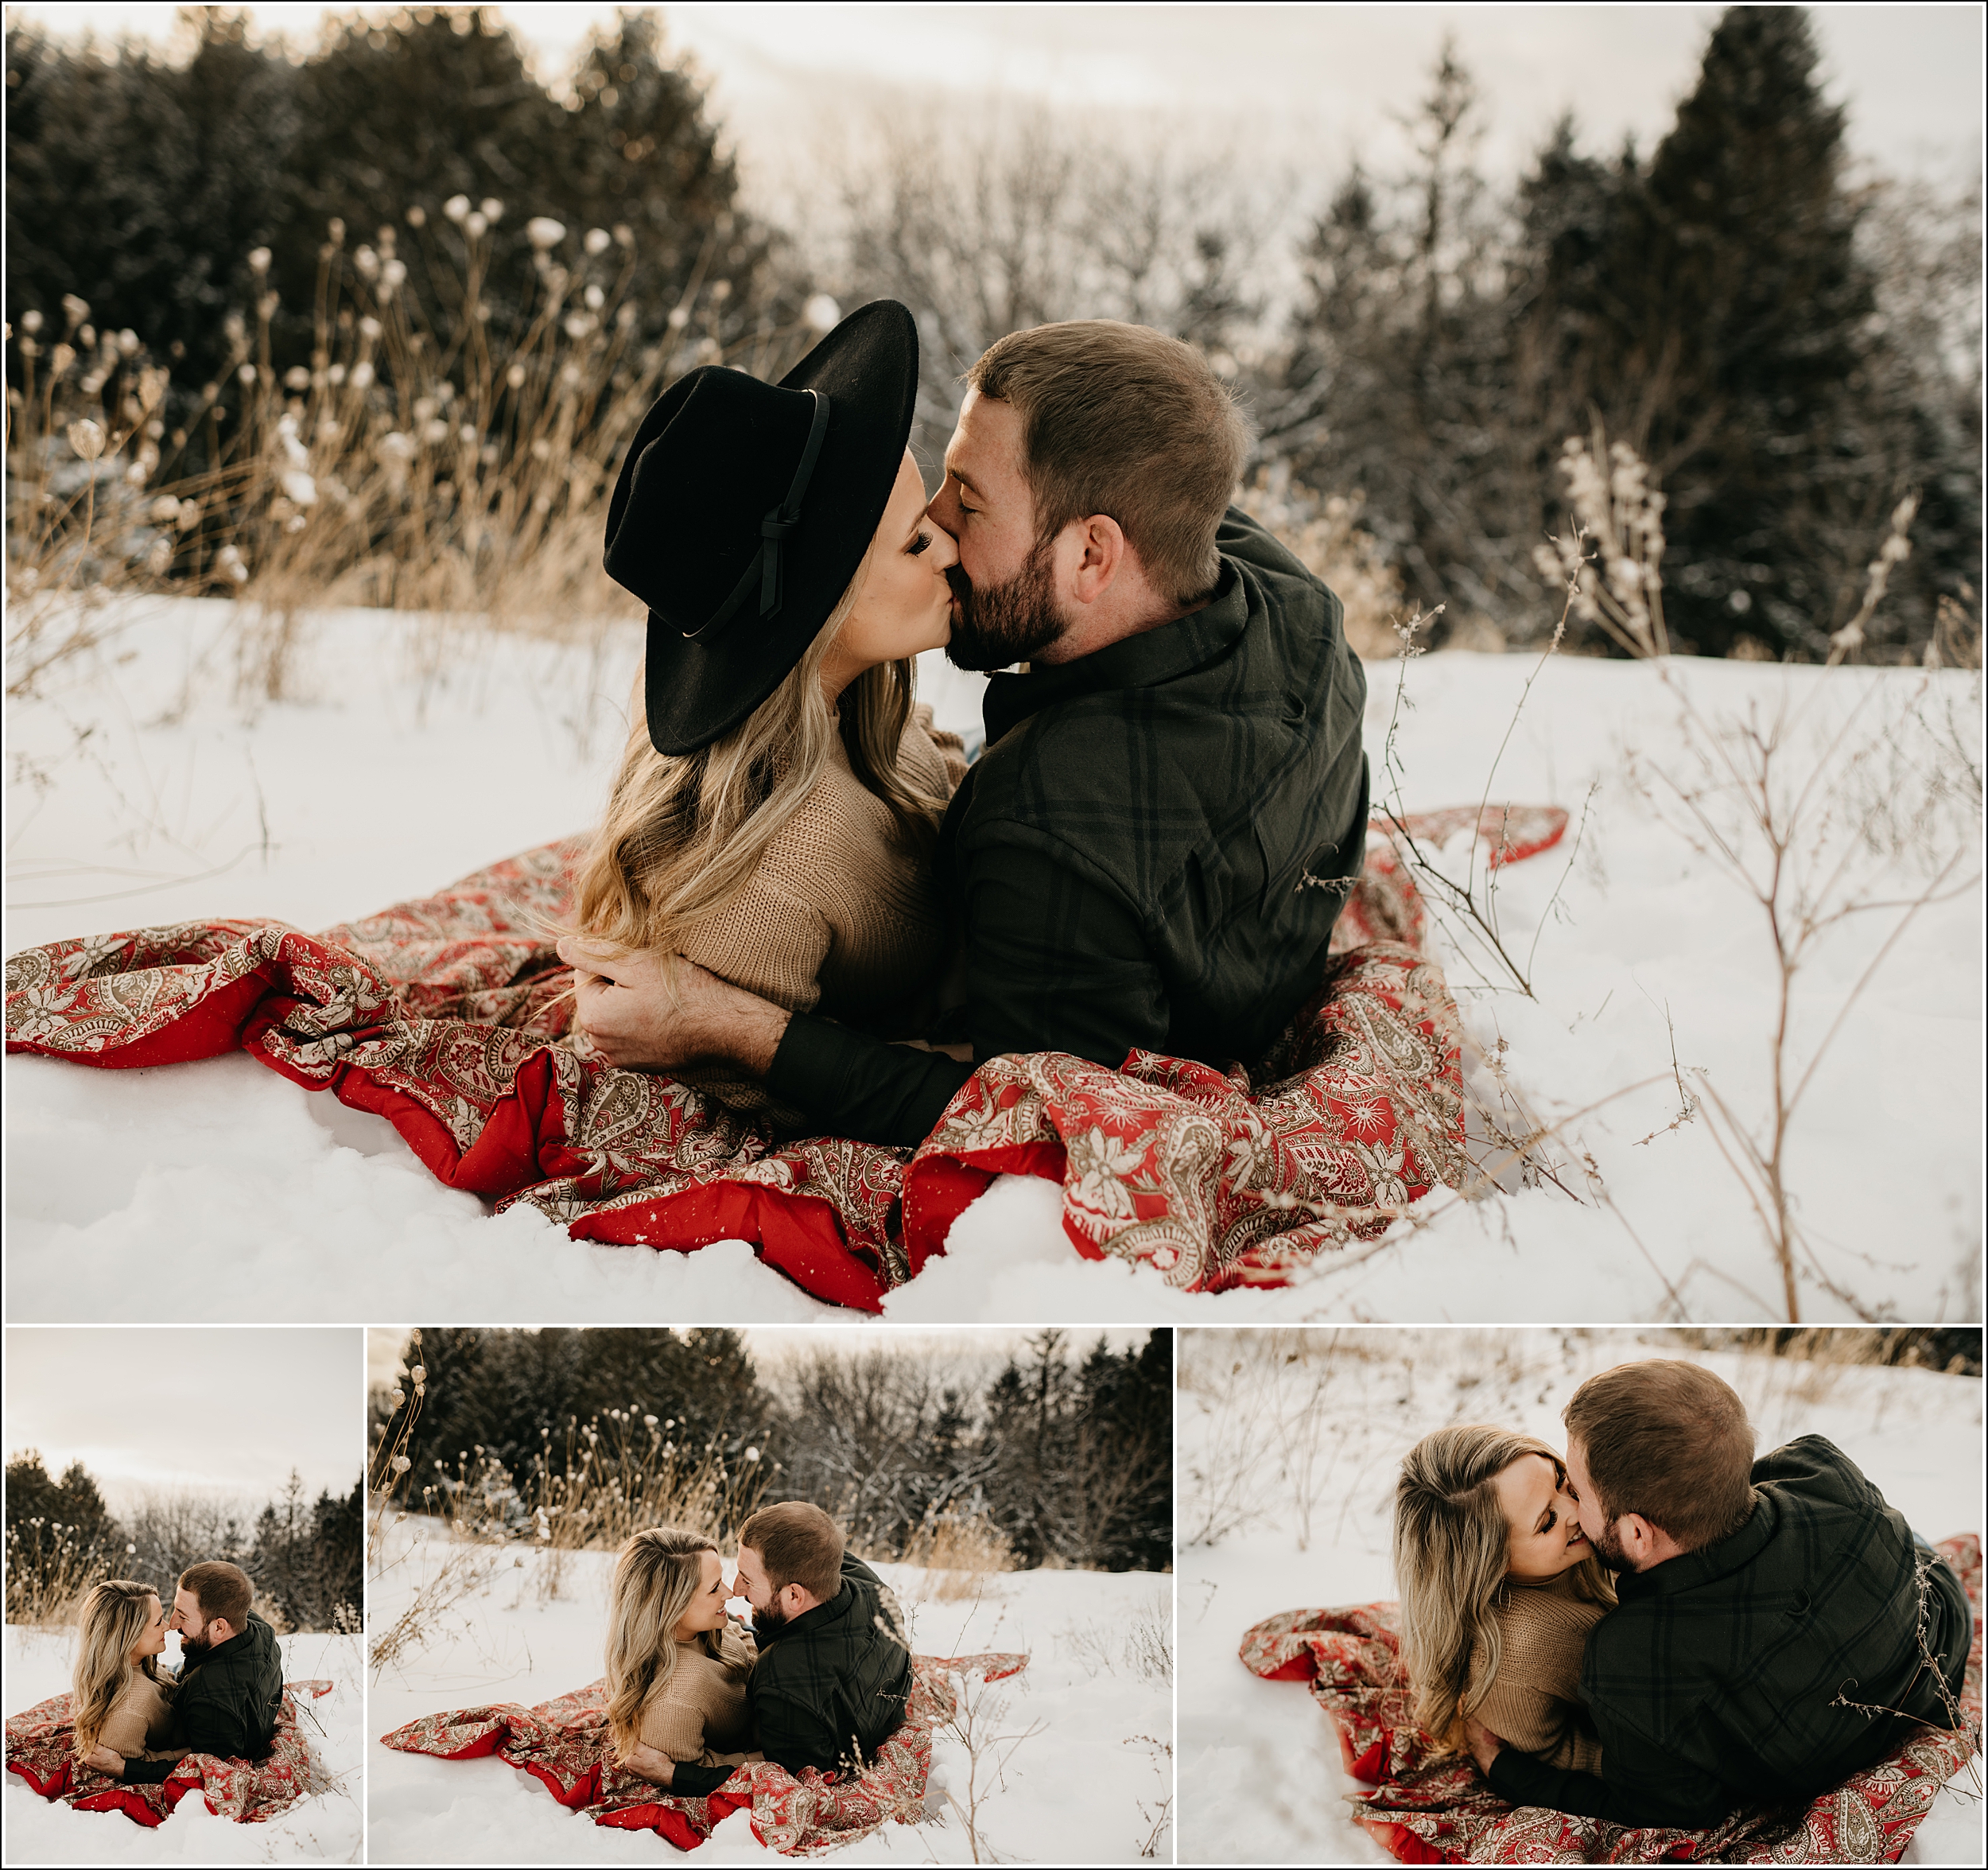 la crosse wi winter engagement pictures couple kissing on a red patterned blanket in the snow with weeds and trees in background